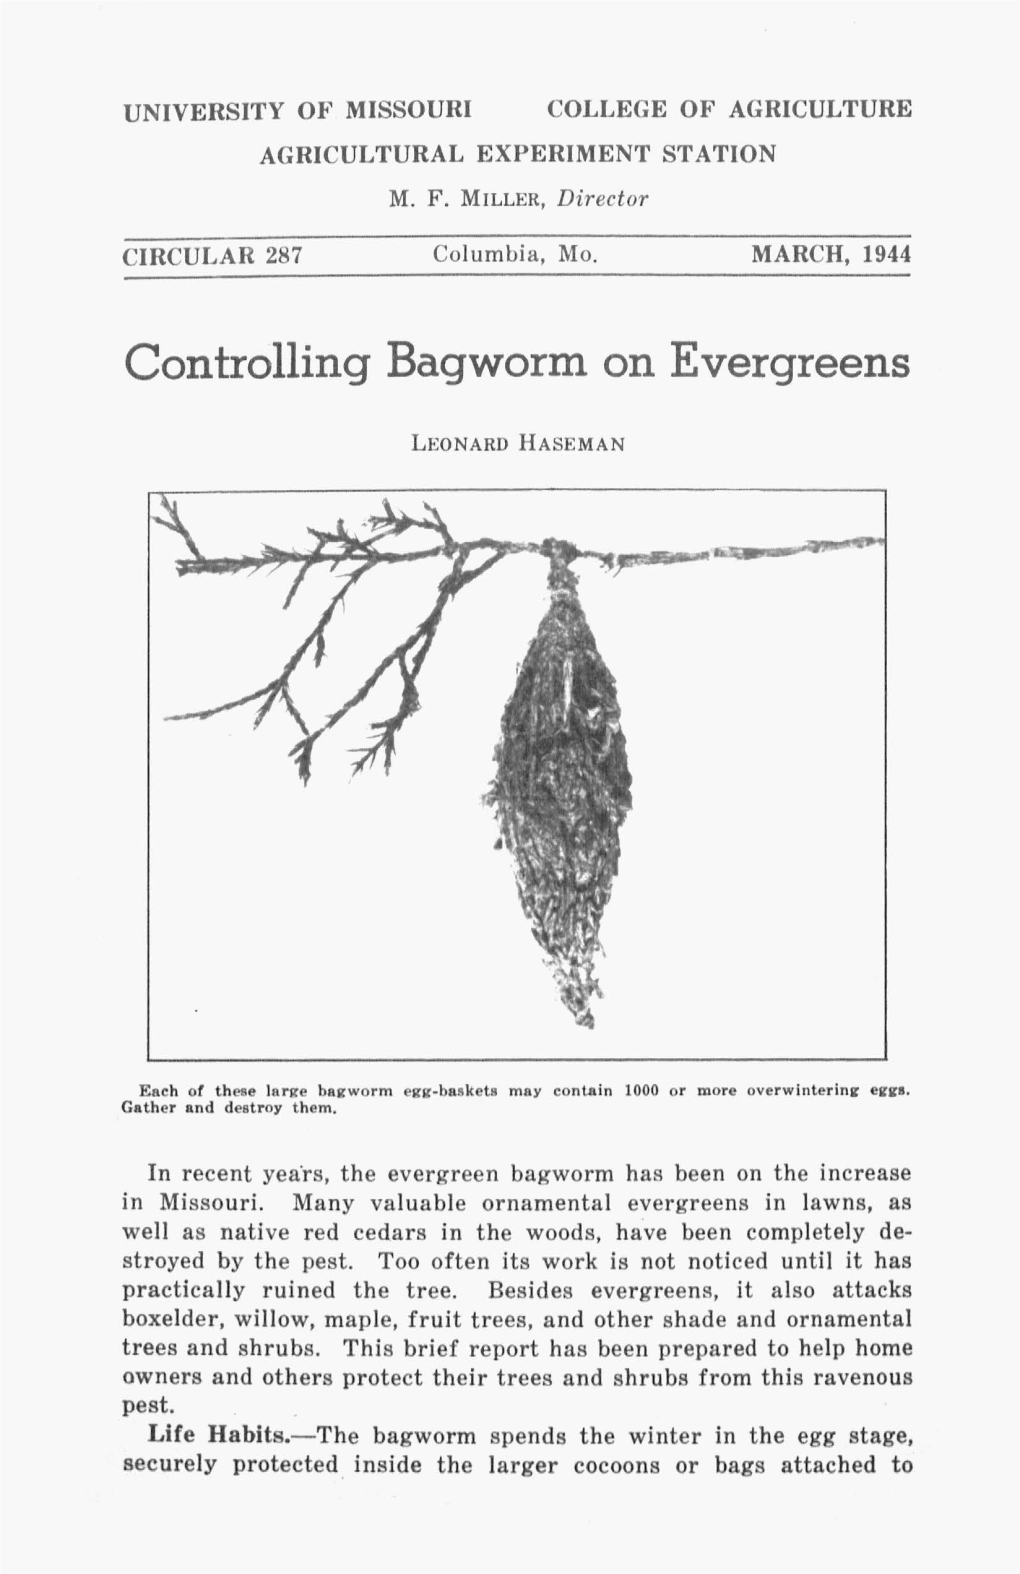 Controlling Bagworm on Evergreens